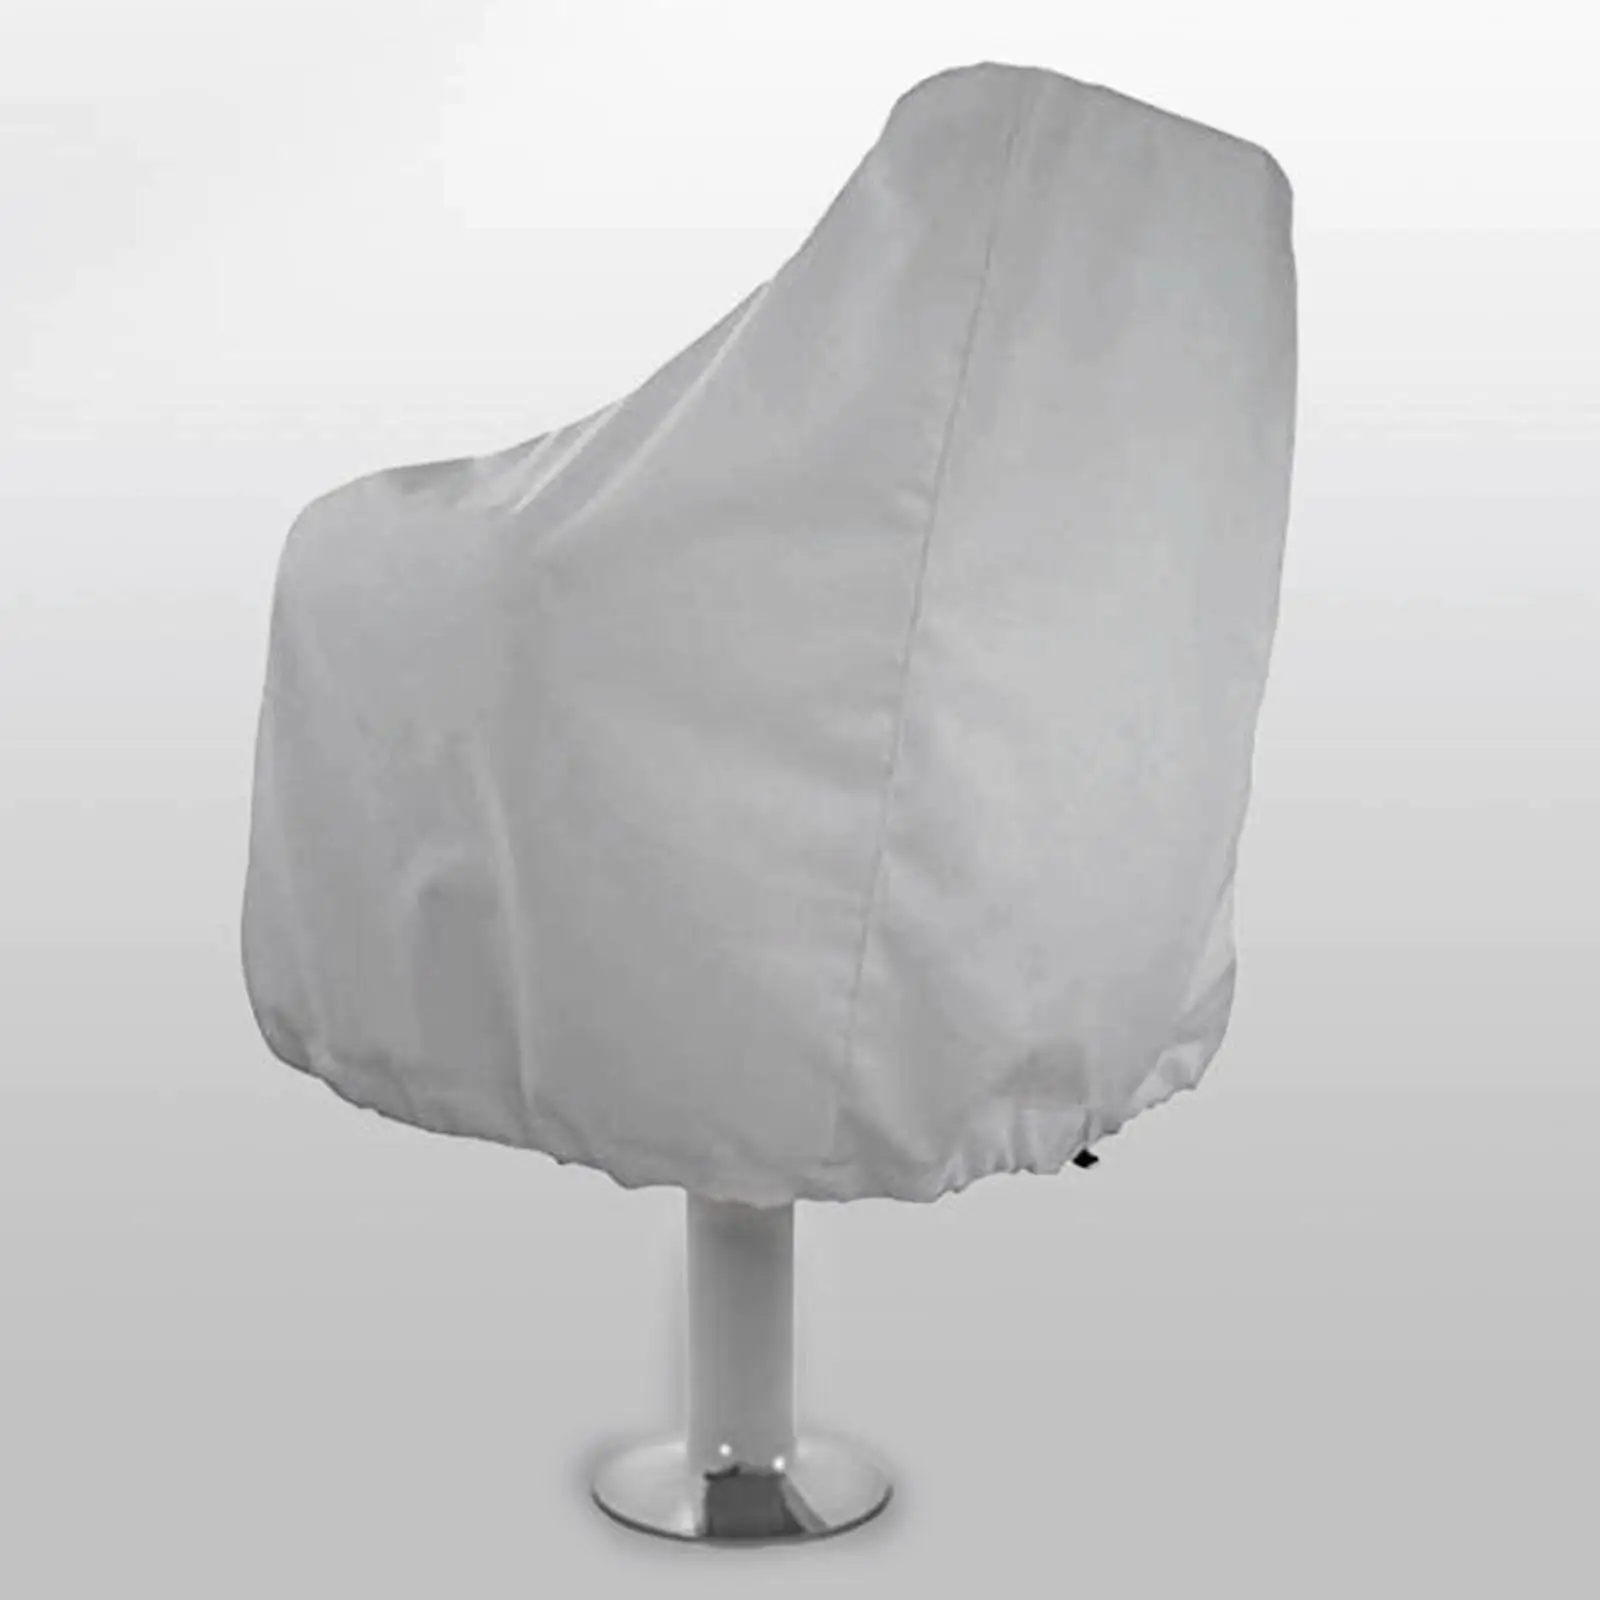 3x Boat Seat Cover, Folding Waterproof Heavy-Duty Weather Resistant Fabric Protects Fishing s 